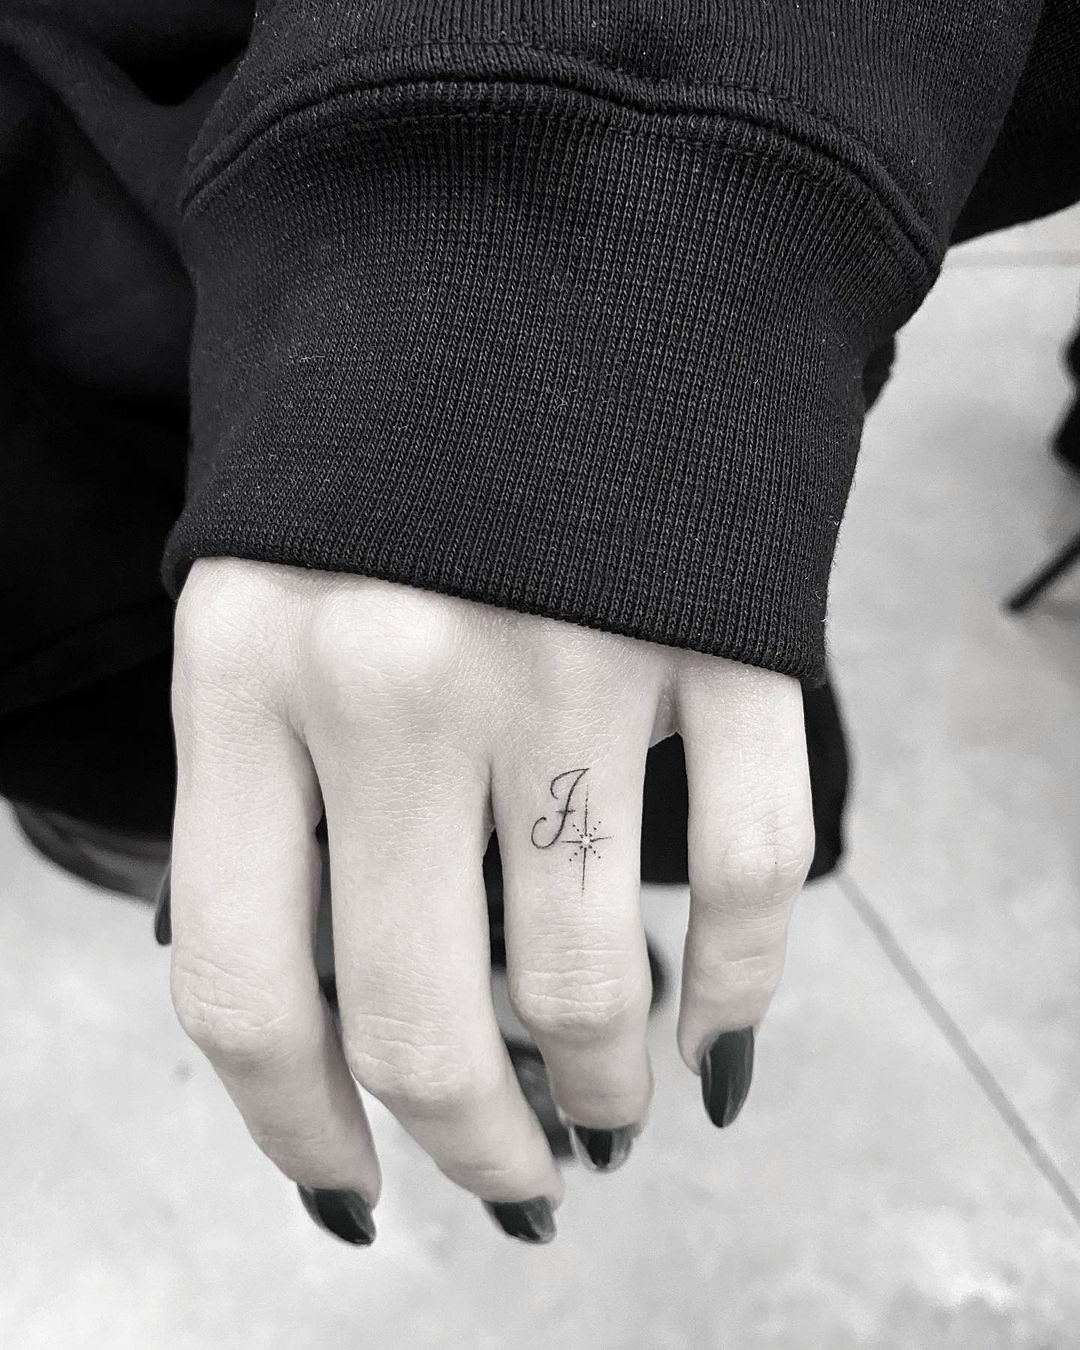 Hailey Baldwin Tattoo Collection and Meanings: Pics